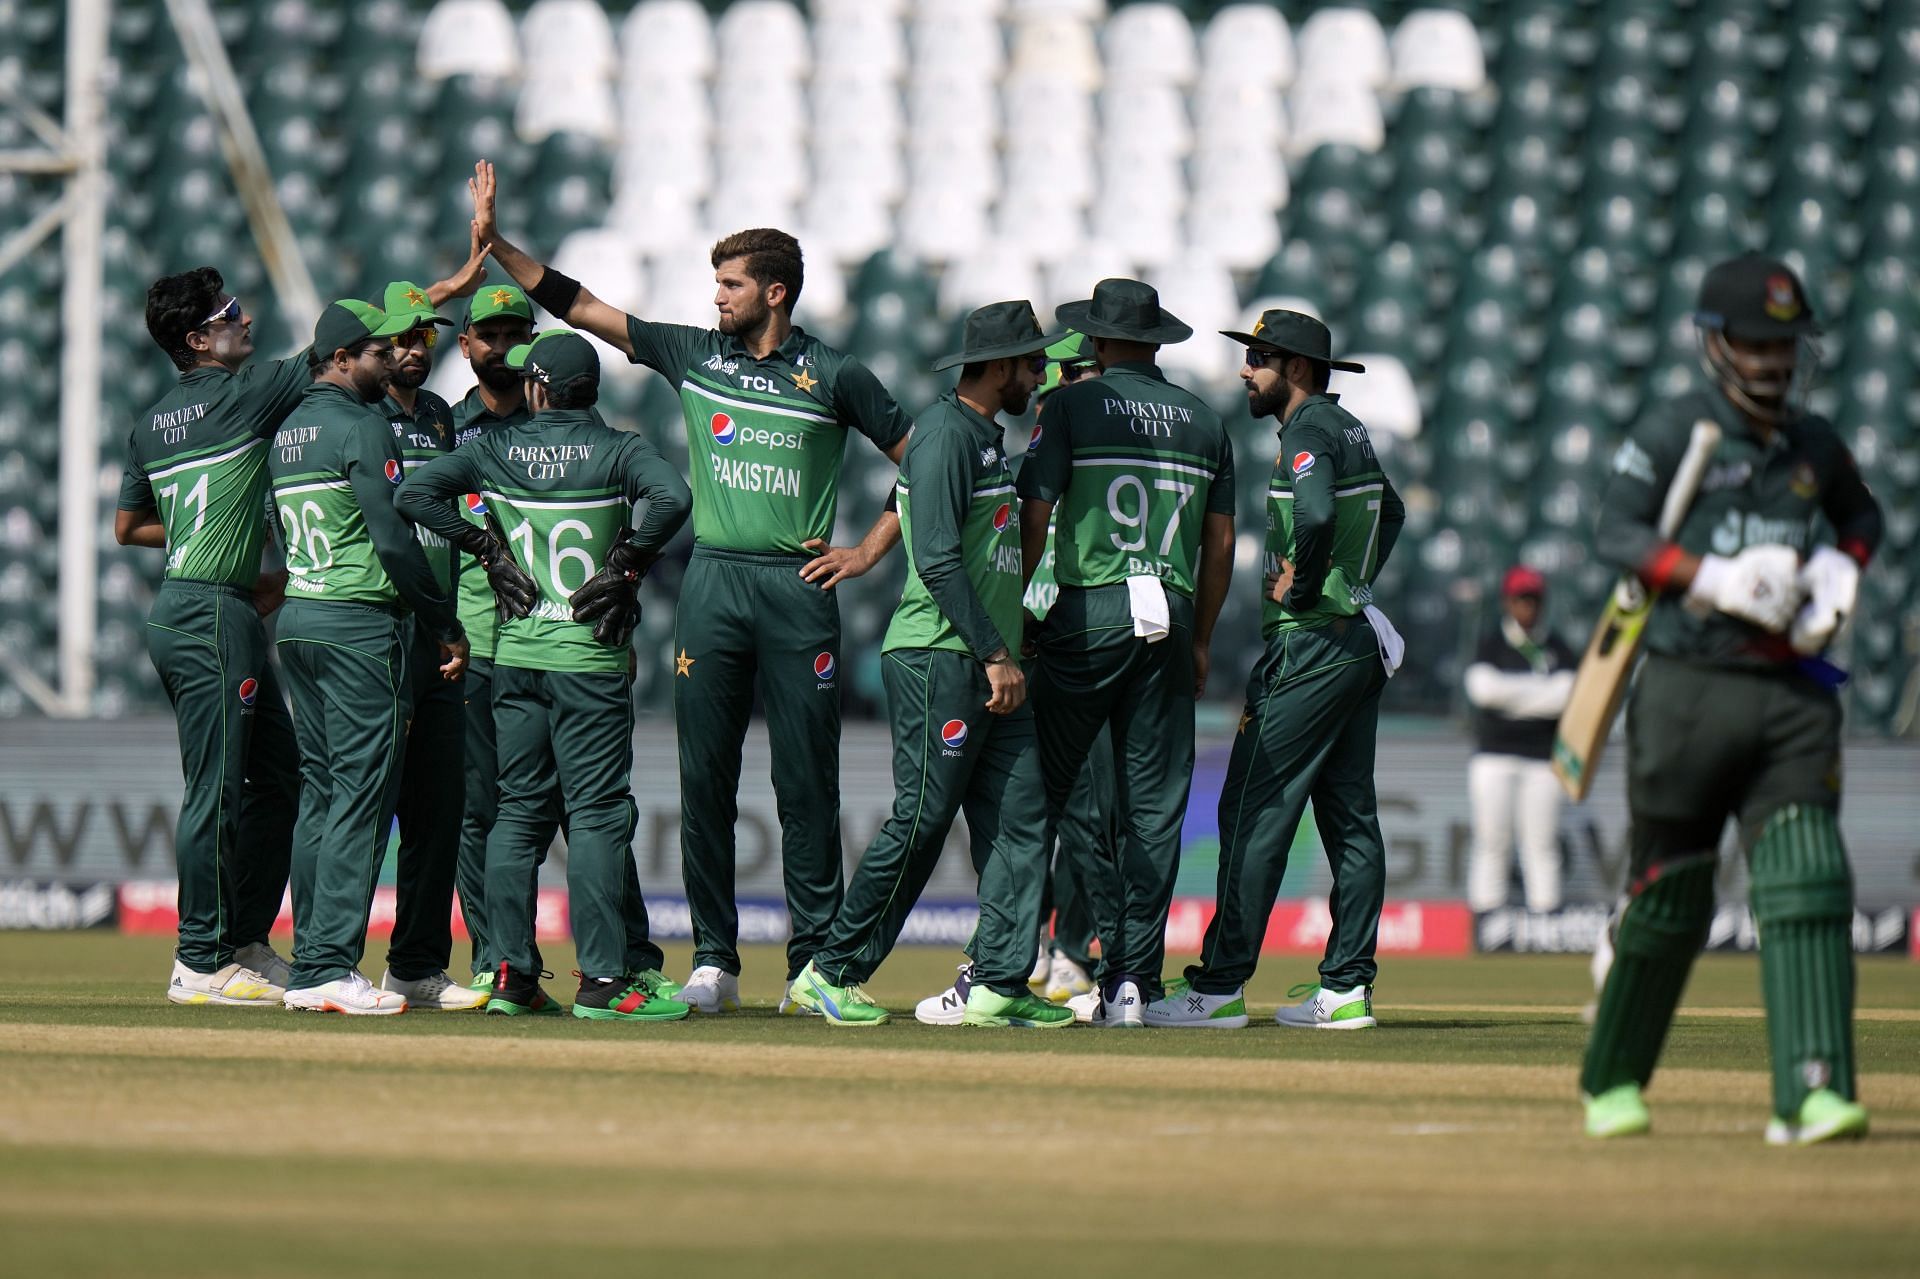 Pakistan registered emphatic victories in both their games on home soil. [P/C: AP]